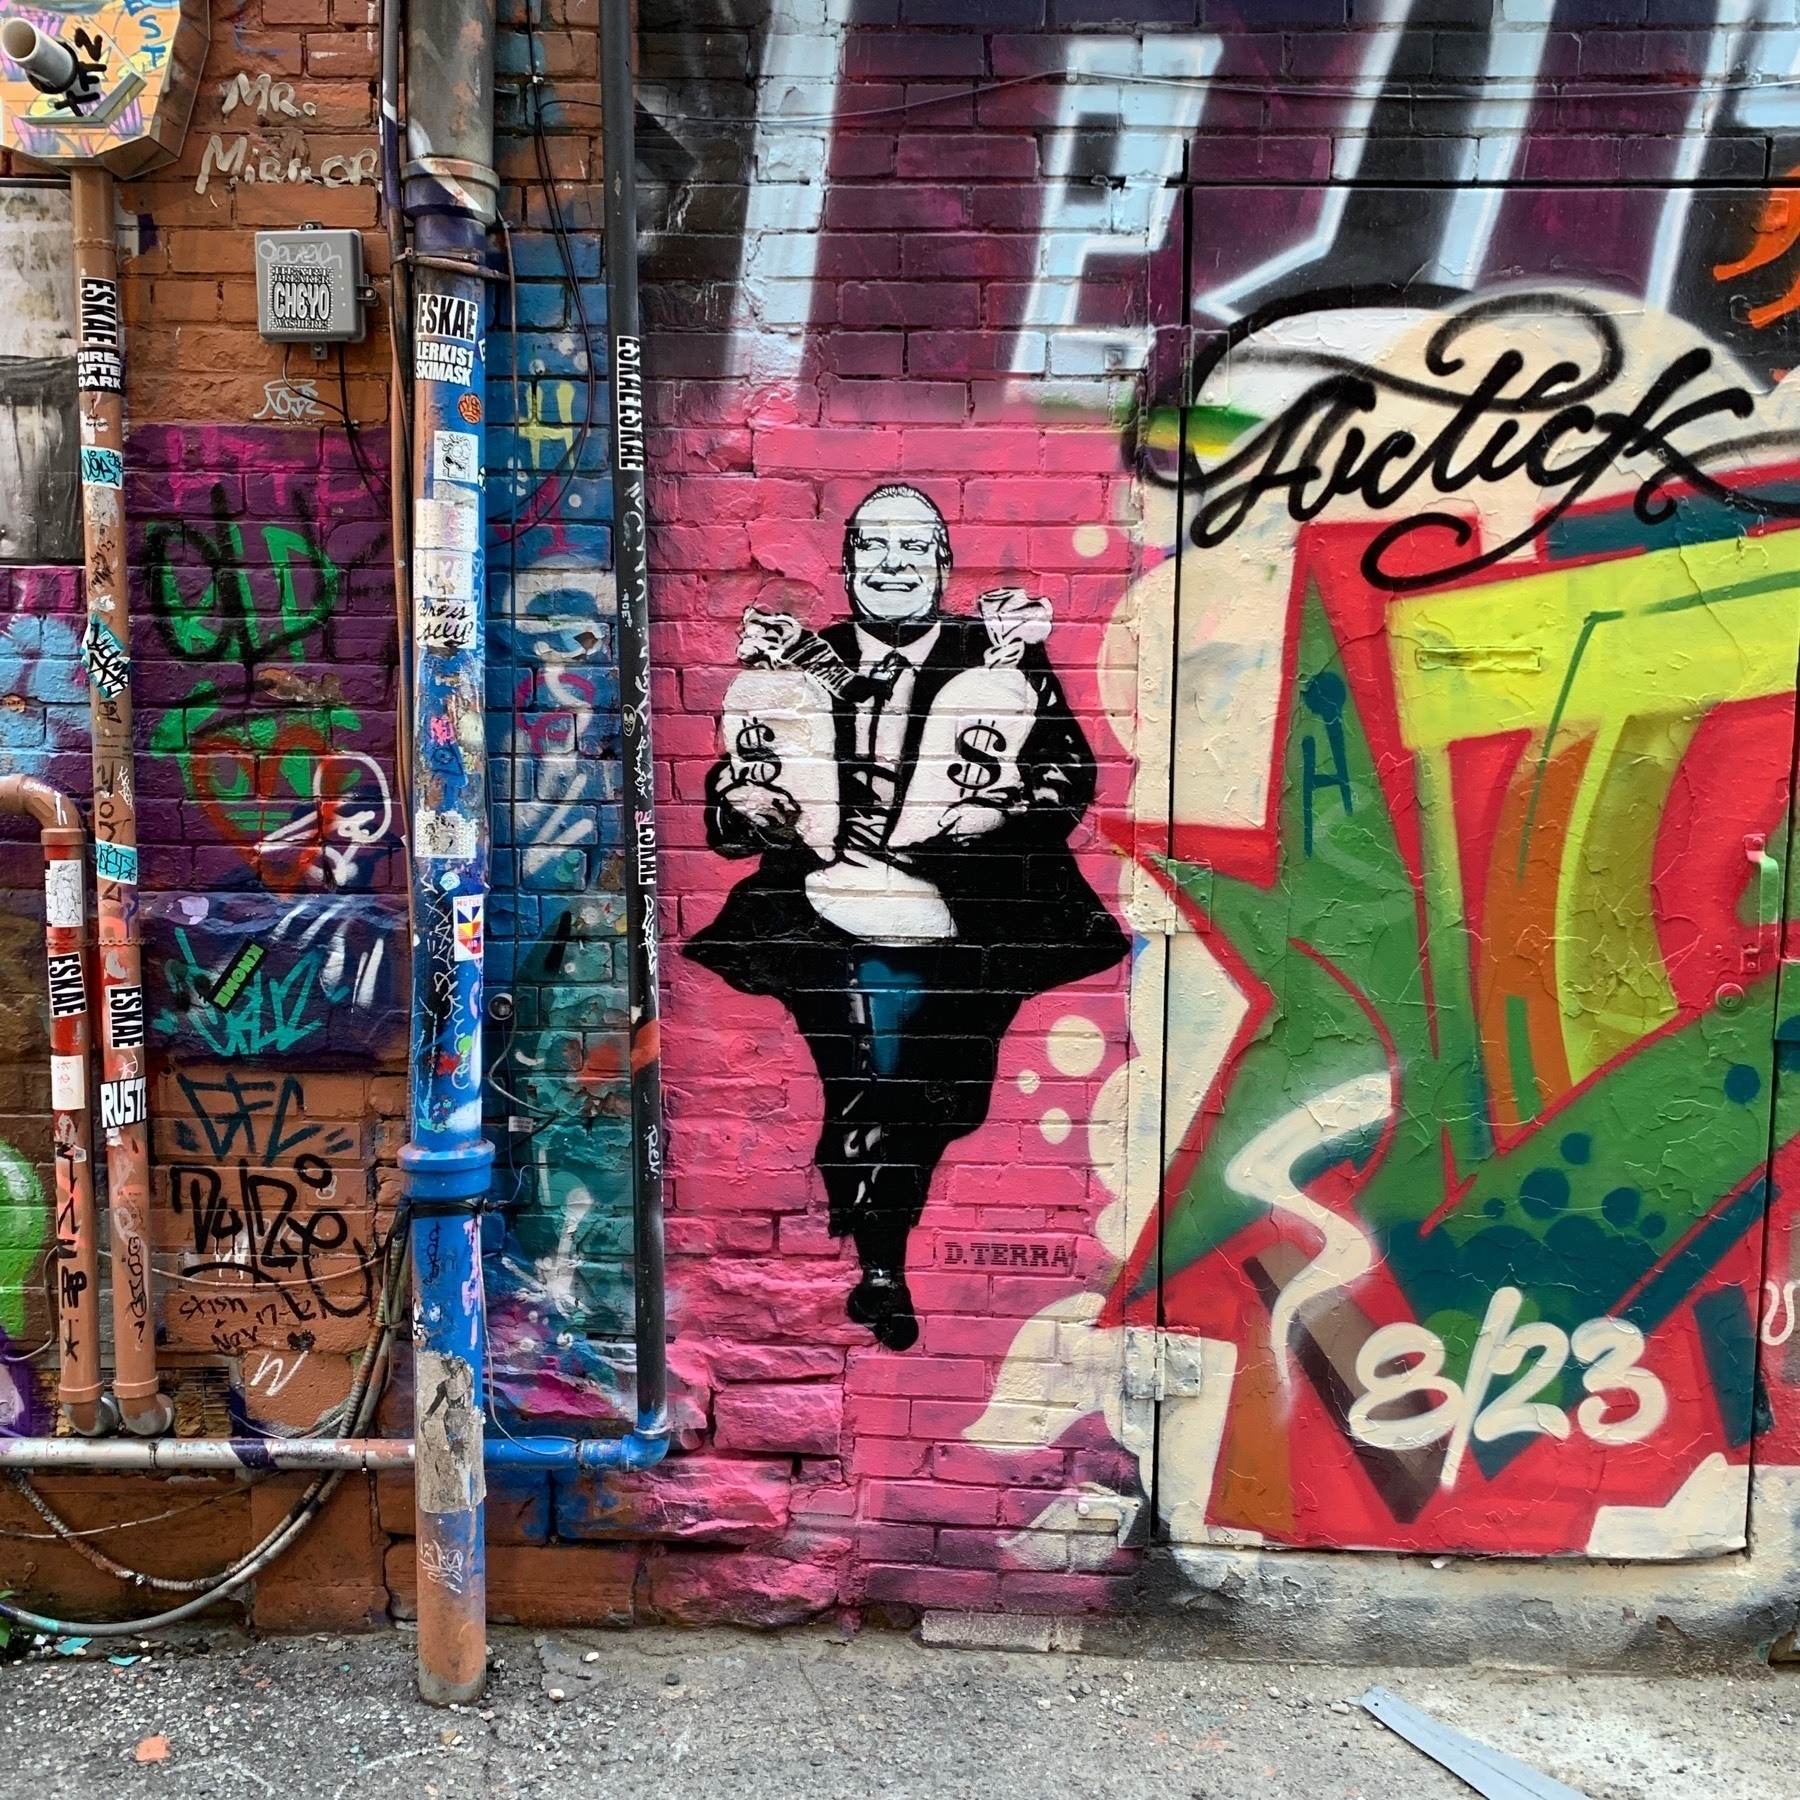 Street art of Doug Ford (current premiere Ontario) holding two large sacks of money.